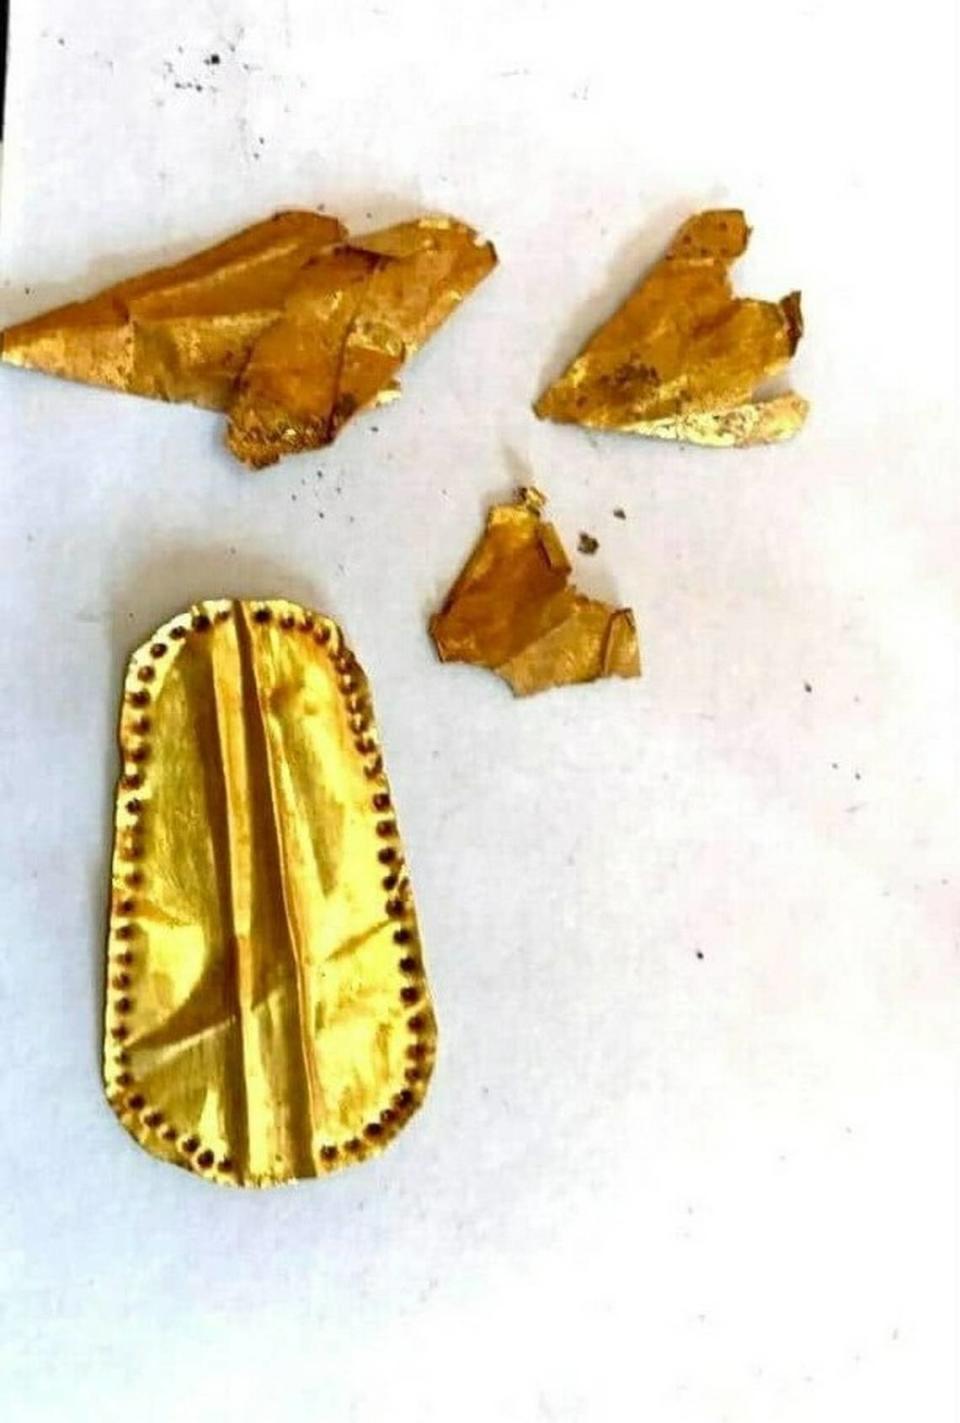 One of the gold tongues (bottom) next to other golden fragments found at the site.